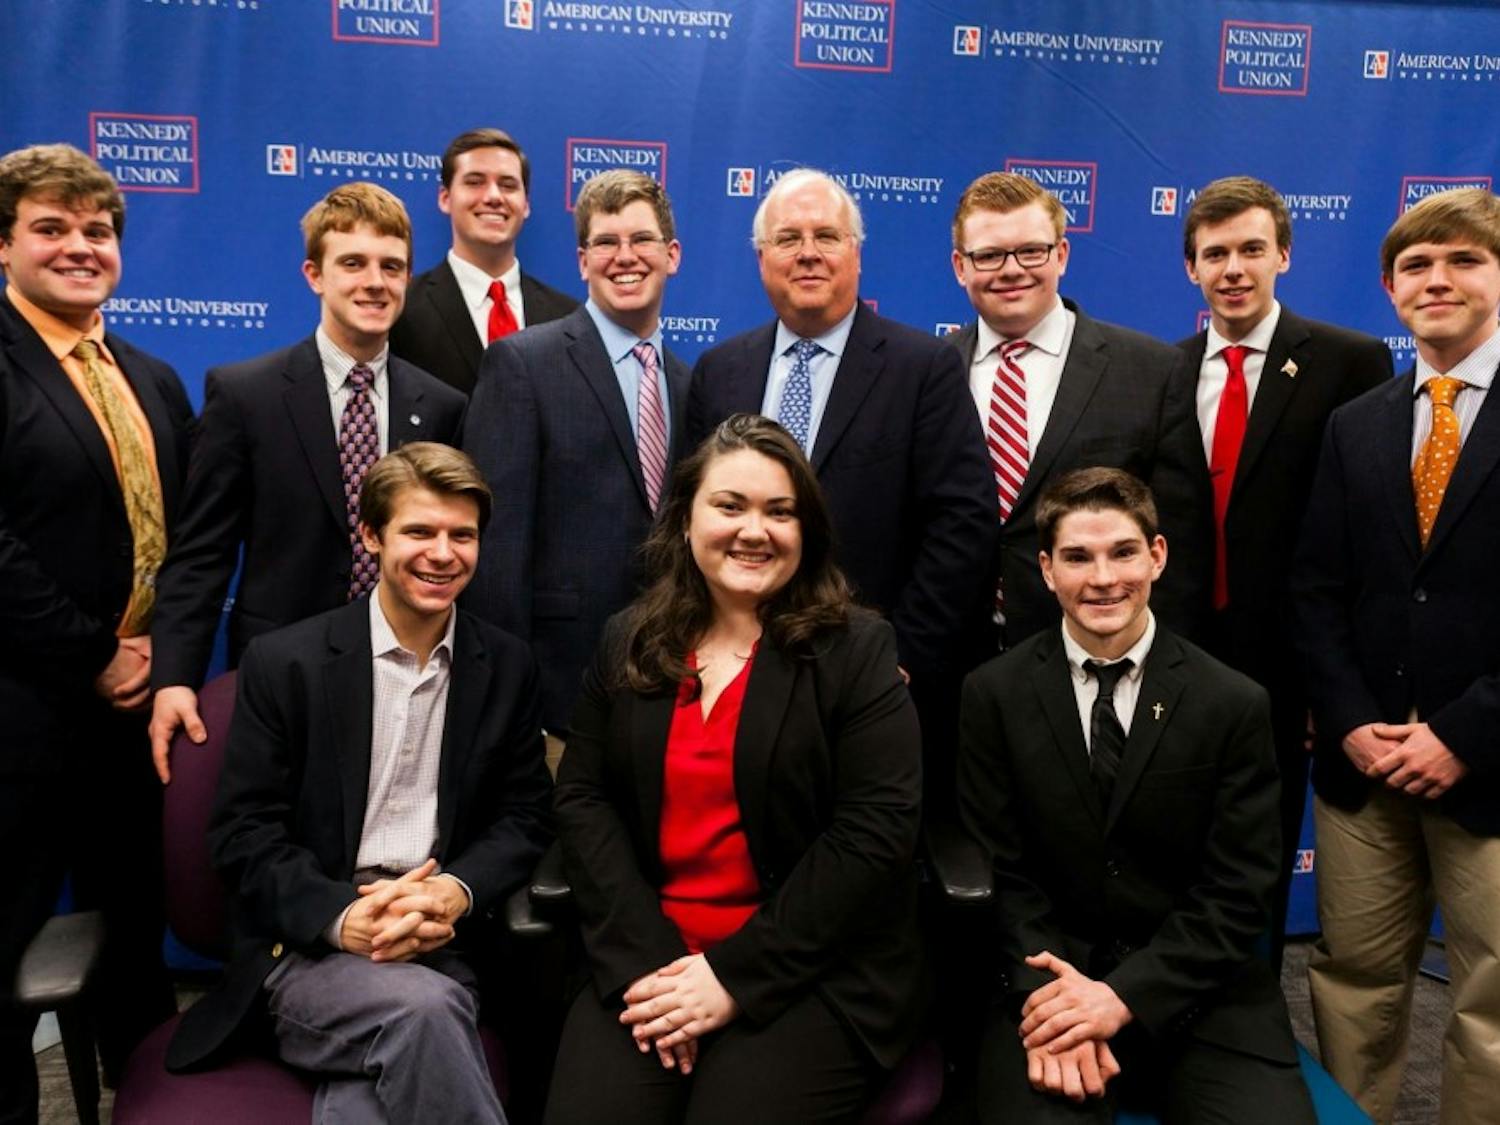 The AU College Republicans pose with Karl Rove during his visit to AU on Feb. 16, 2016.&nbsp;